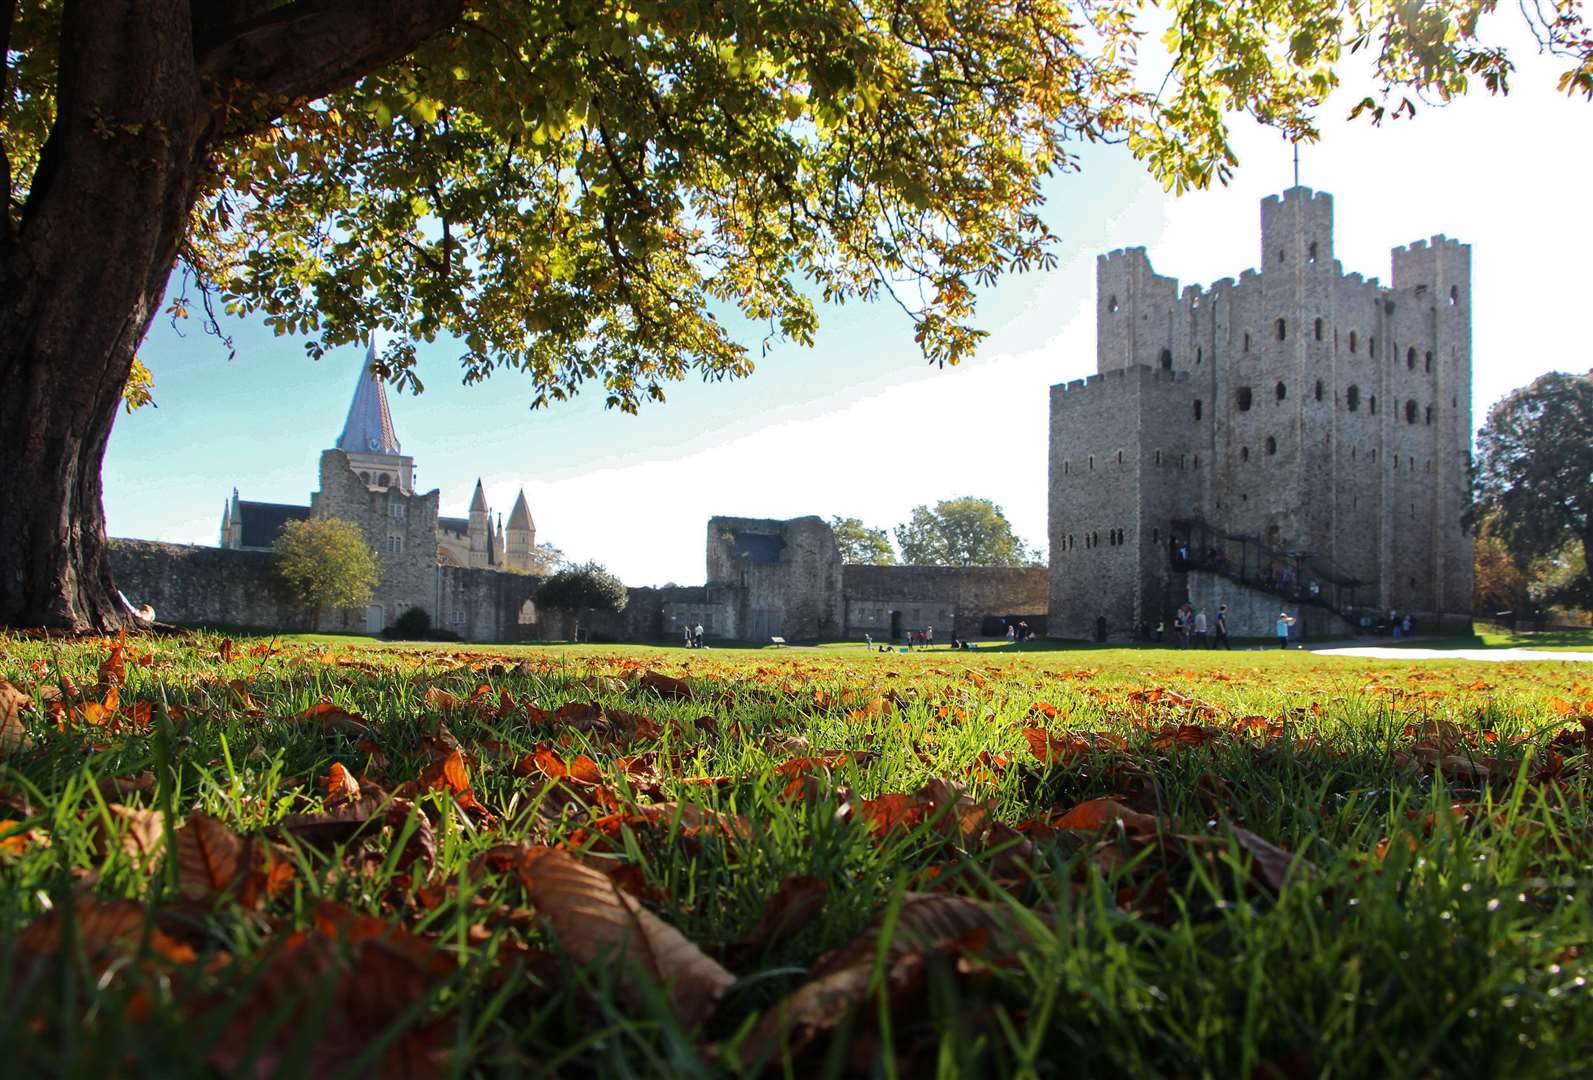 Rochester Castle Gardens in the sunshine. Picture courtesy of David Mathias.